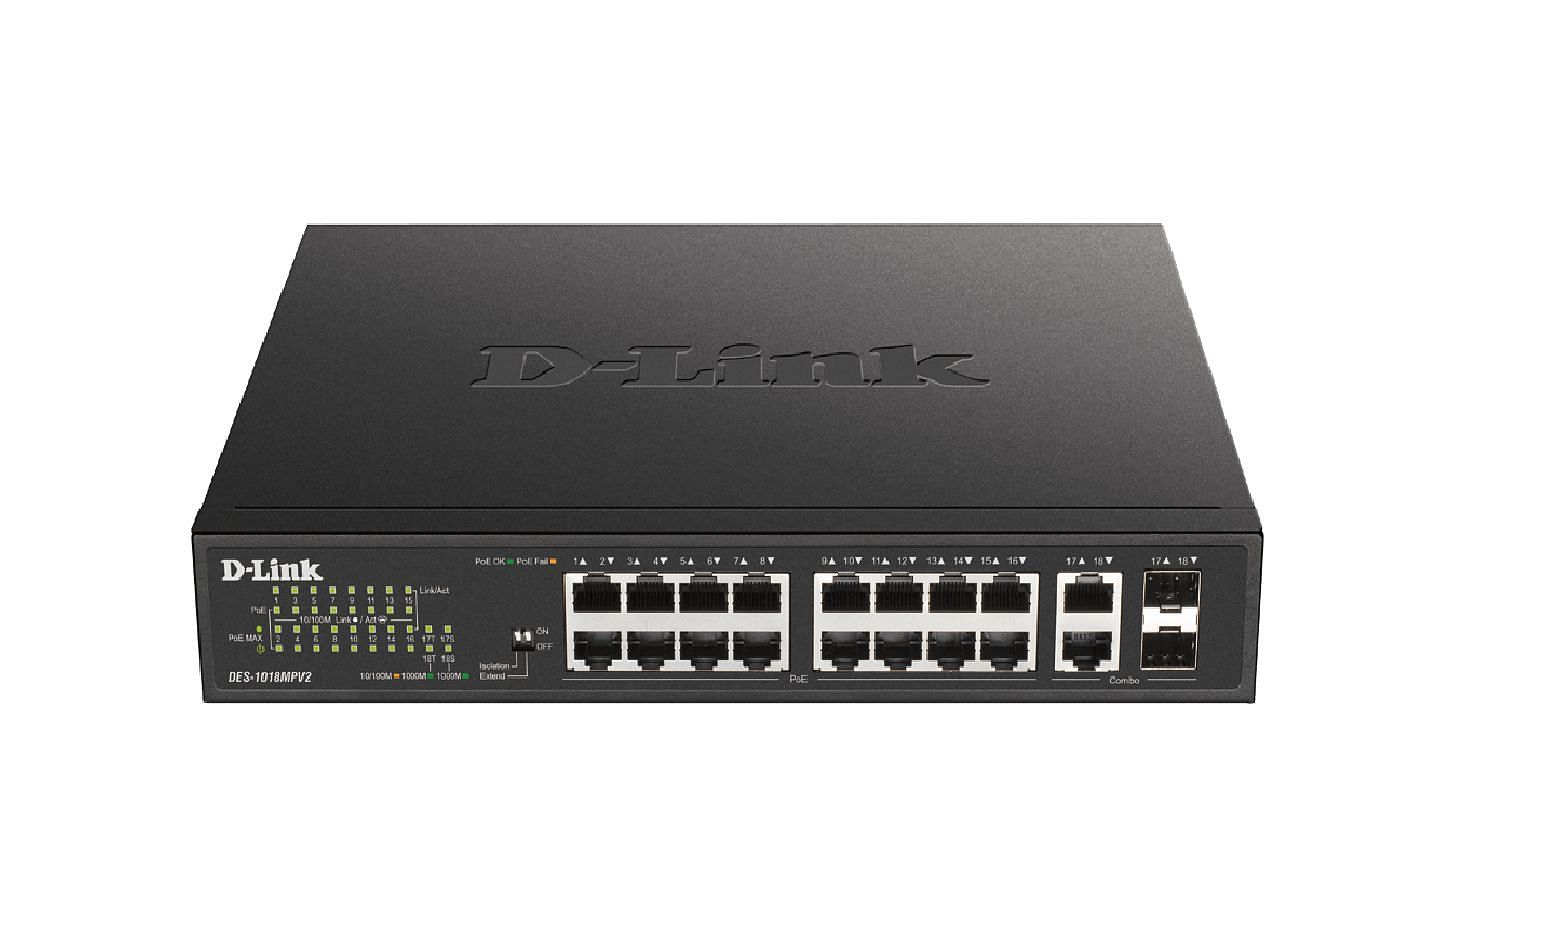 Best Network Switches: Add Ports, Speed to Your Network